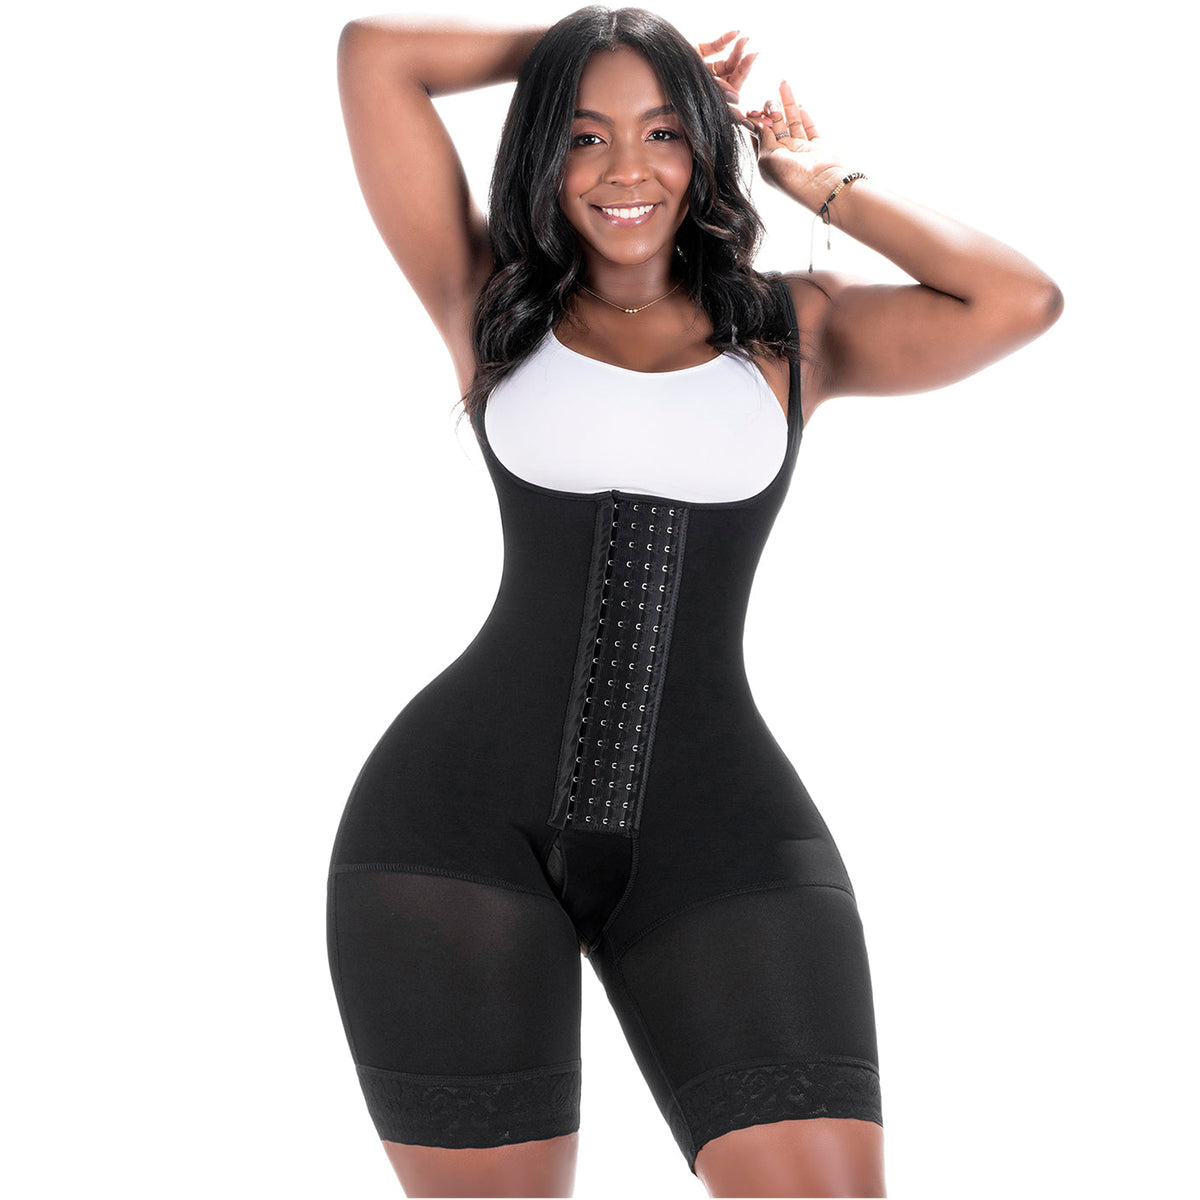 Glookwis Ladies Body Shaper Magic Tape Waist Trainer Workout Solid Color  Trimmer Sports Casual Tummy Control Shape Girdle Black XL